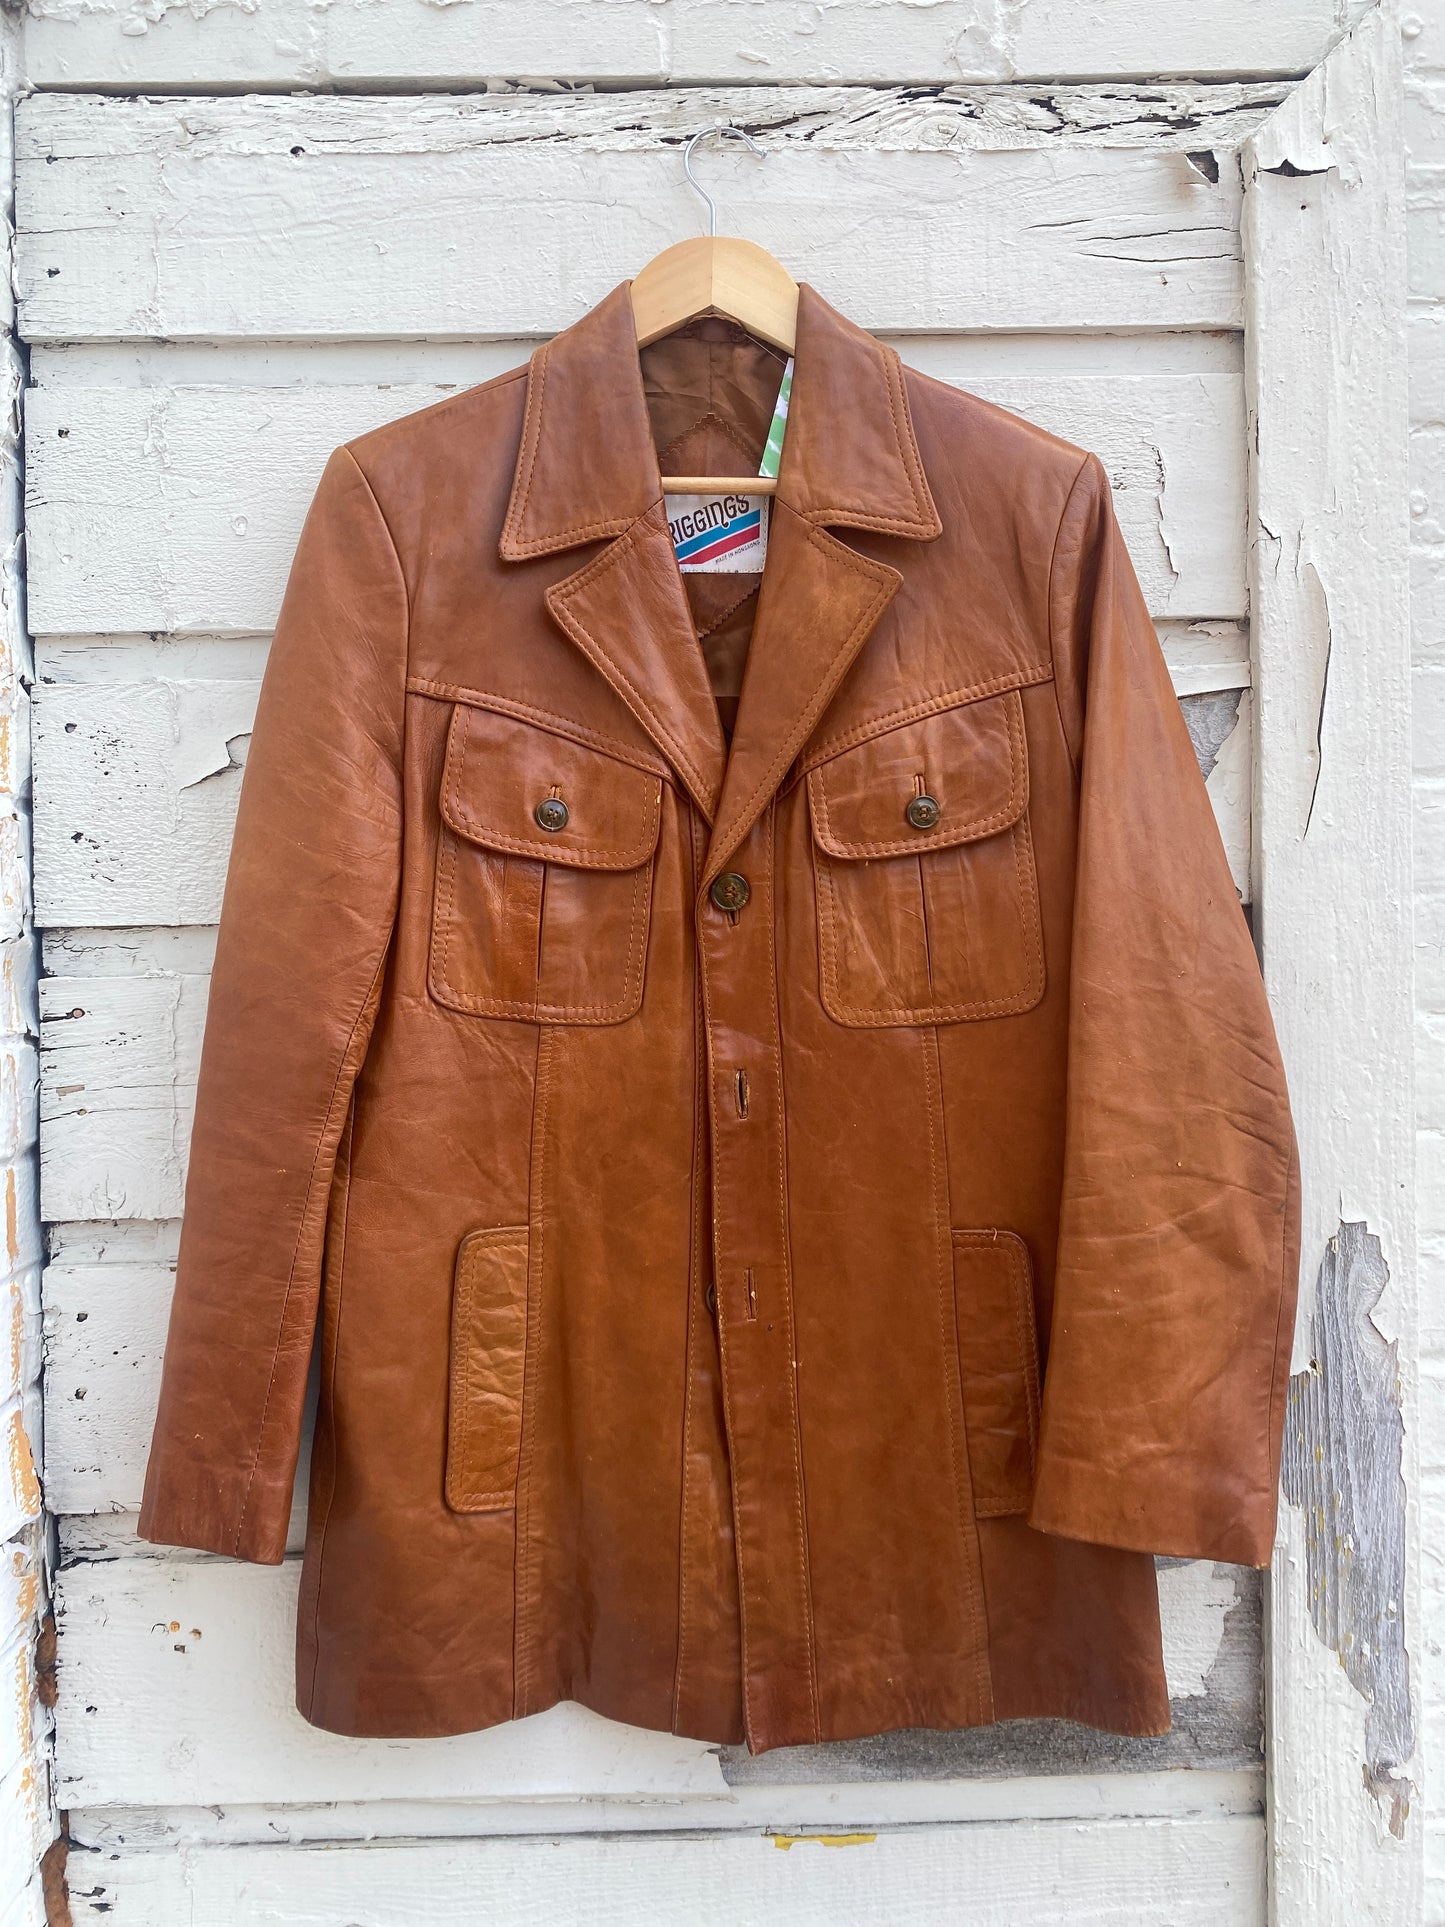 Vintage 1970s Leather Point Collar Jacket See Measurements